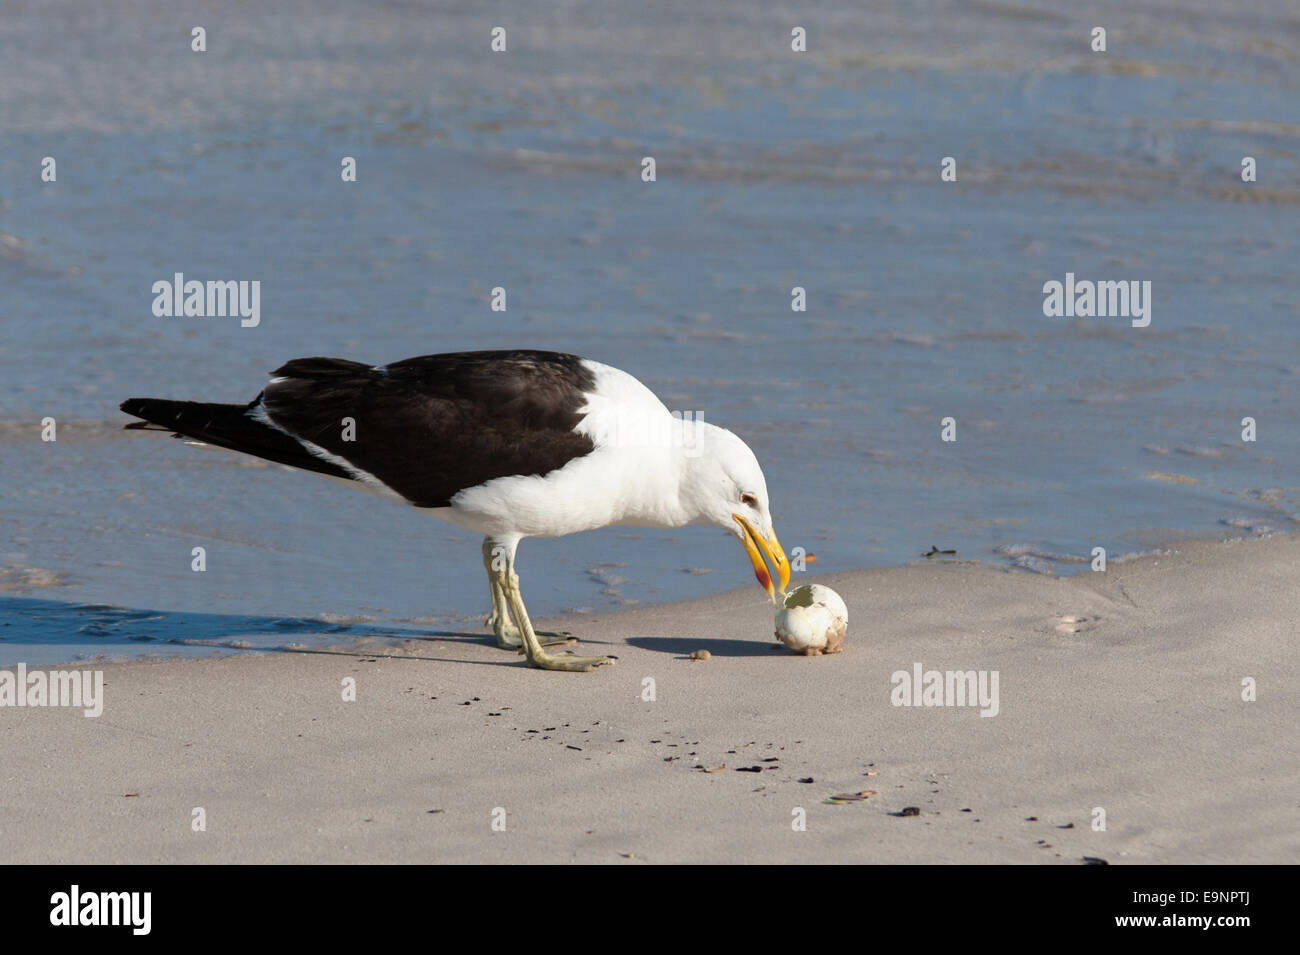 Cape gull, Larus vetula, eating African penguin egg, Spheniscus demersus, Table Mountain national park, Cape Town, South Africa Stock Photo